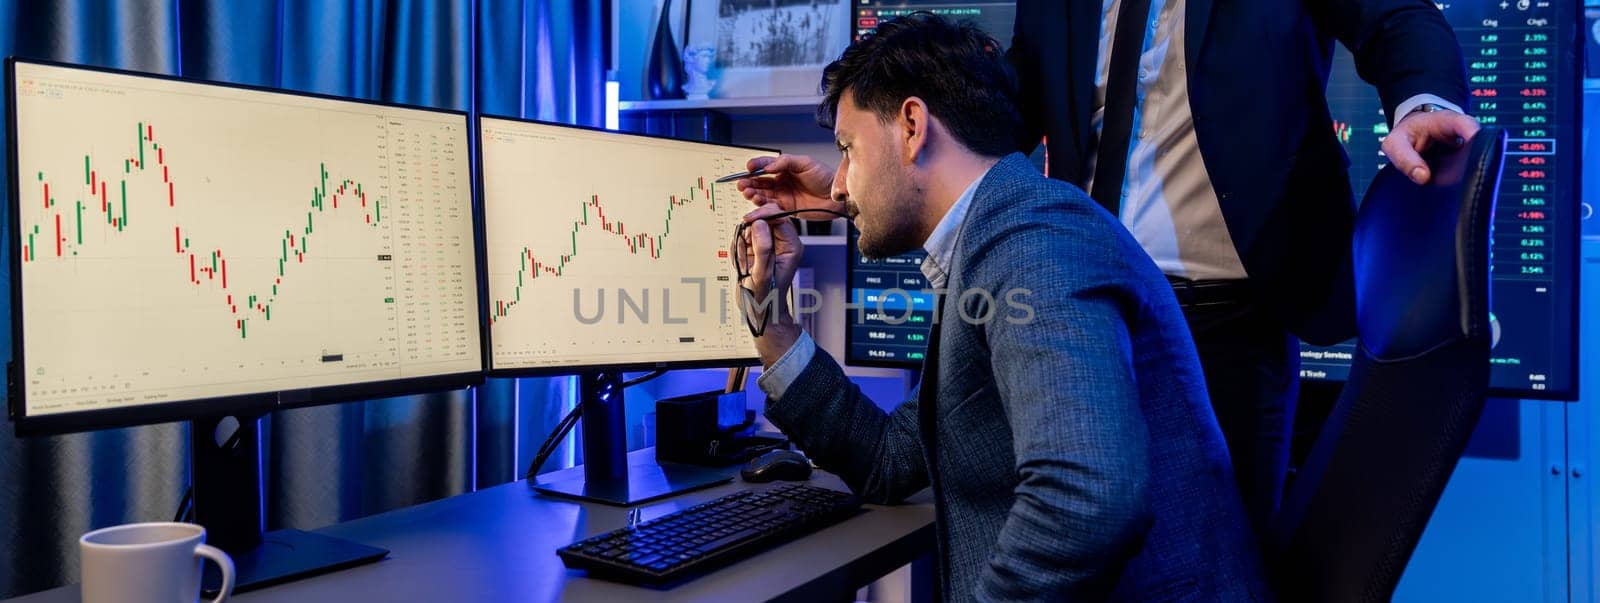 Stock exchange traders looking on high profit chart investment in panorama view, analyzing on monitor at night. Concept of discussing financial technology growth in neon light at workplace. Sellable.